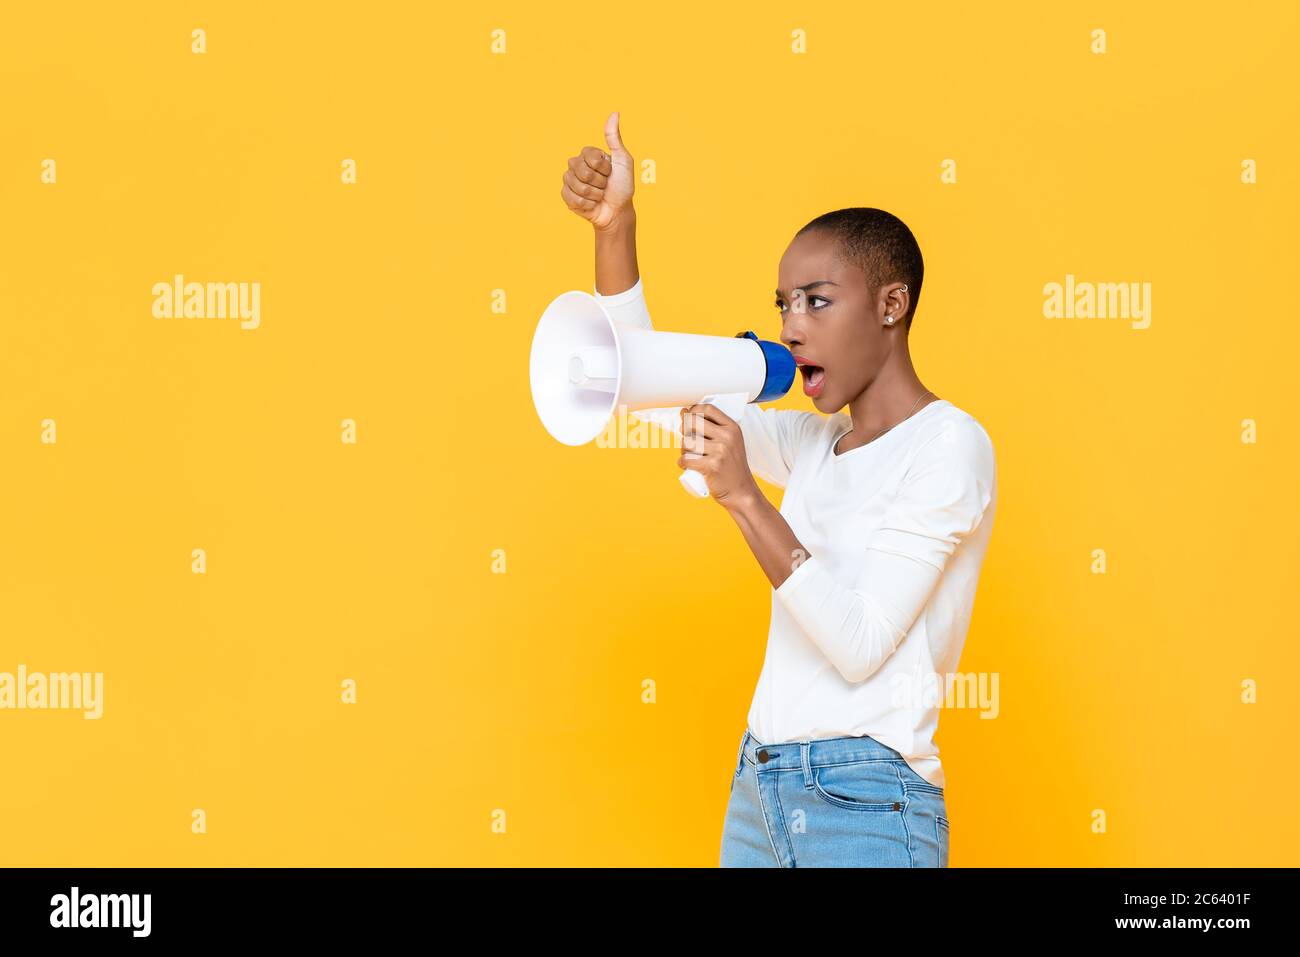 African American woman shouting on megaphone and giving thumbs up isolated on yellow background Stock Photo